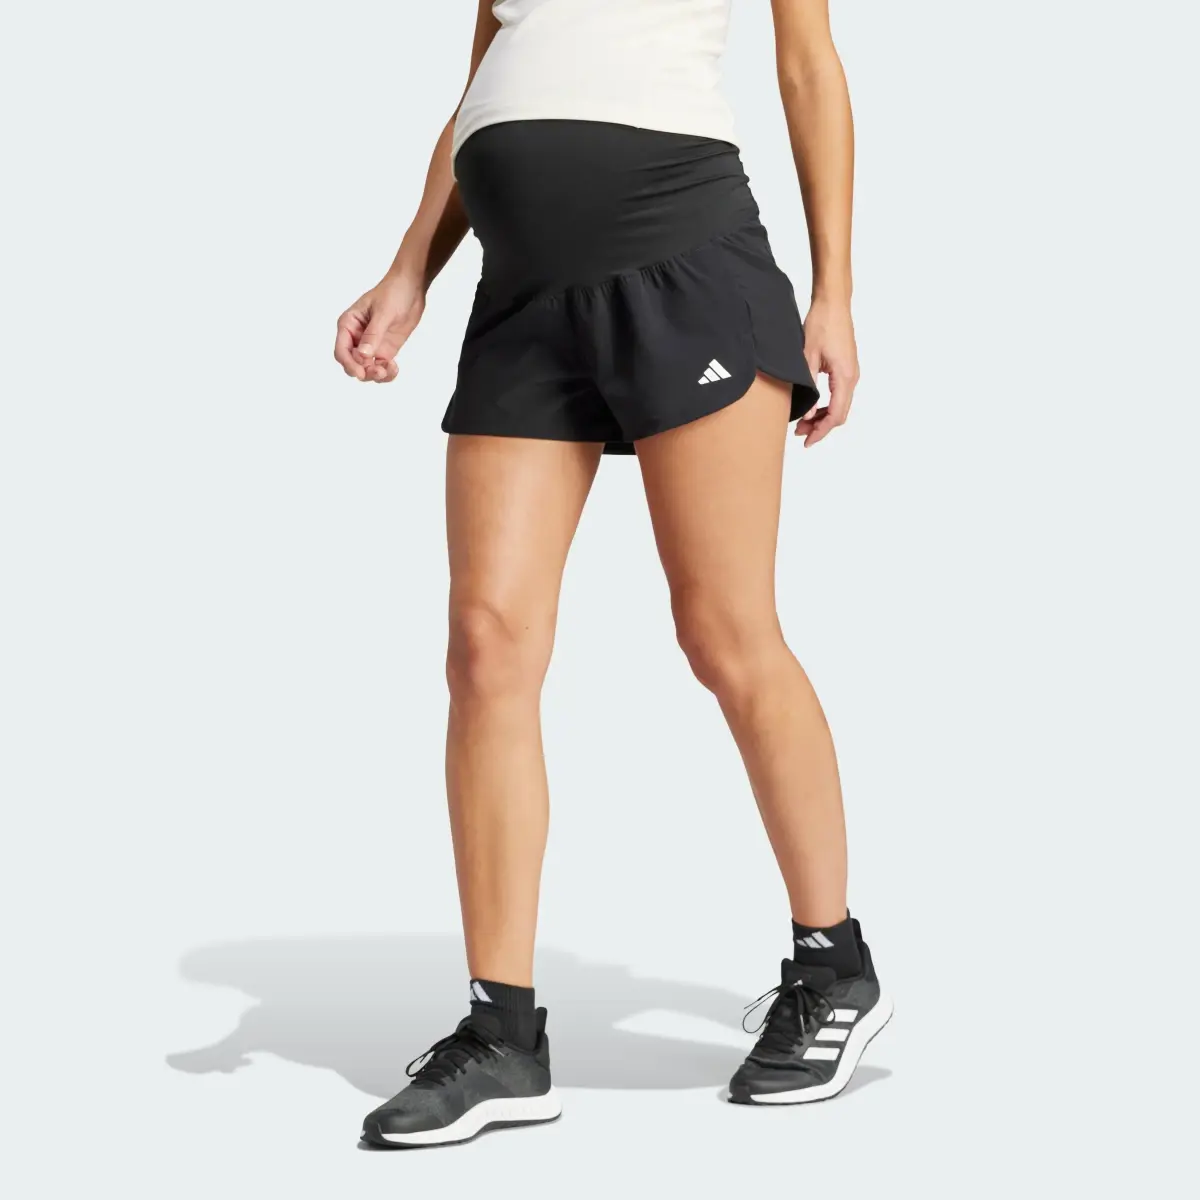 Adidas Pacer Woven Stretch Training Maternity Shorts. 2